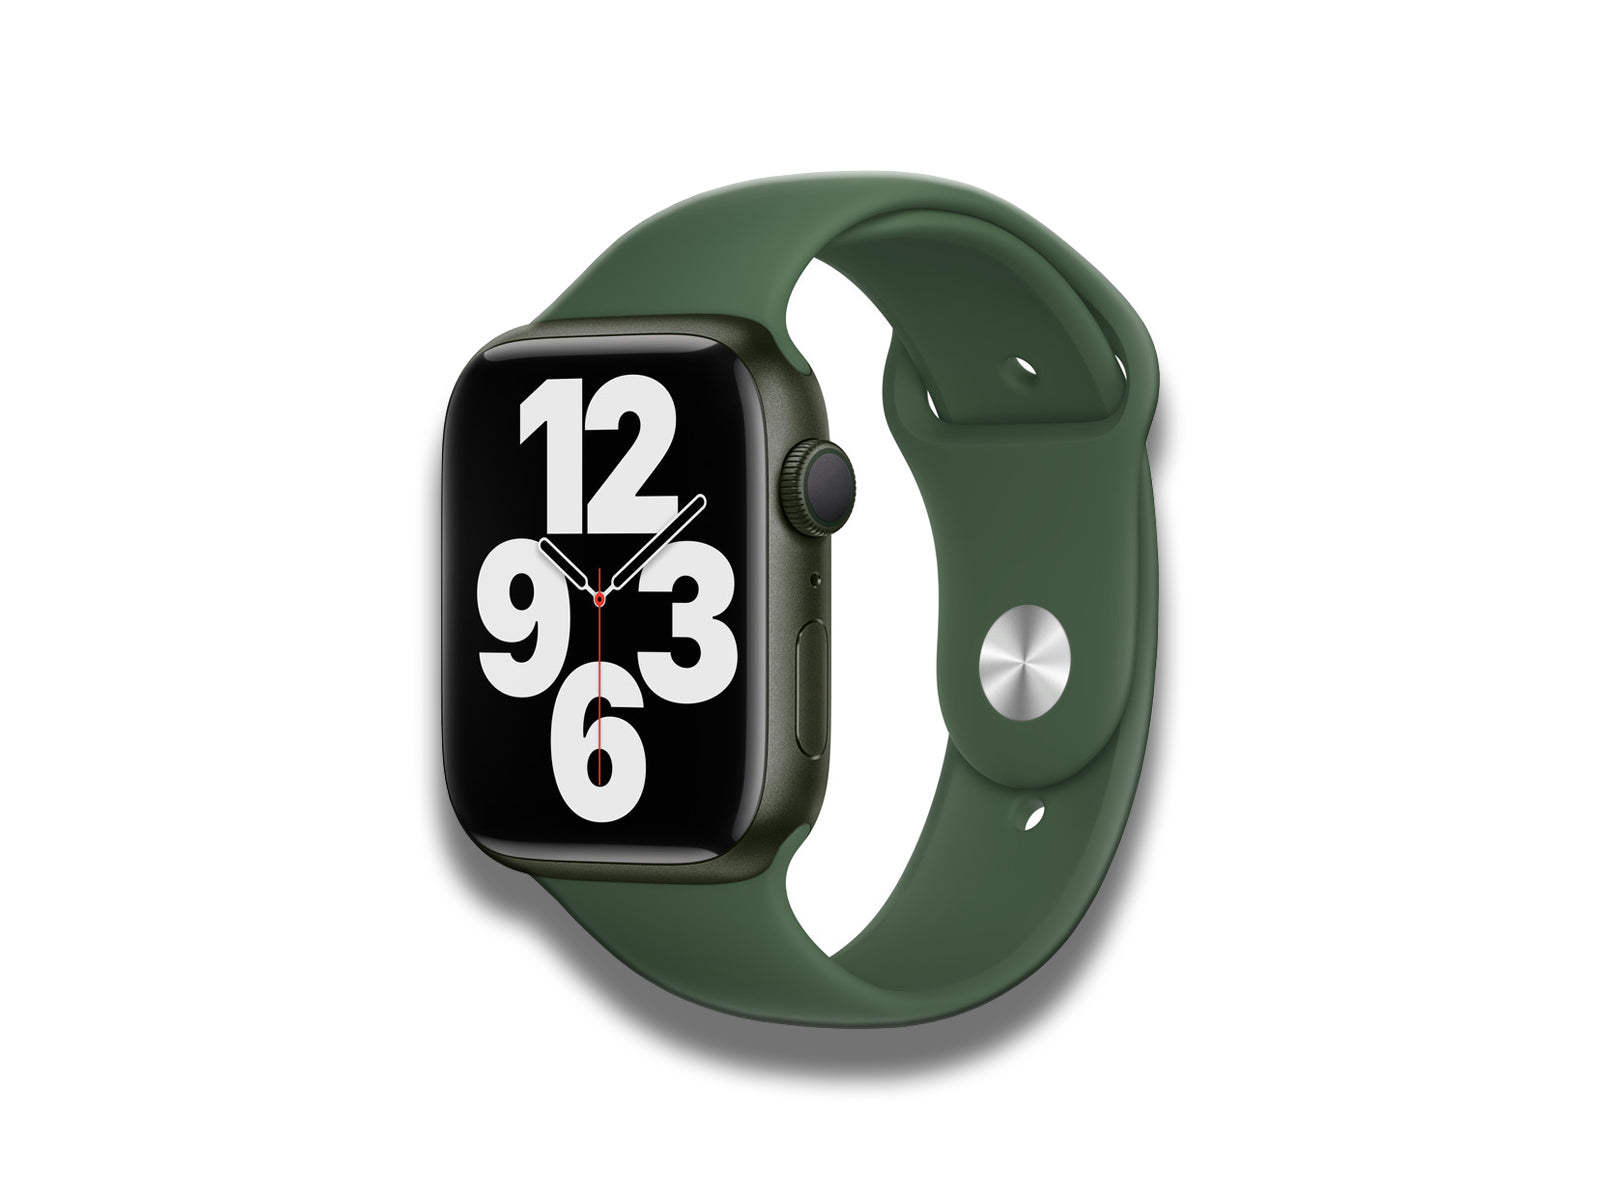 Image shows a dull front view of the Apple watch series 7 in clover with the band attatched